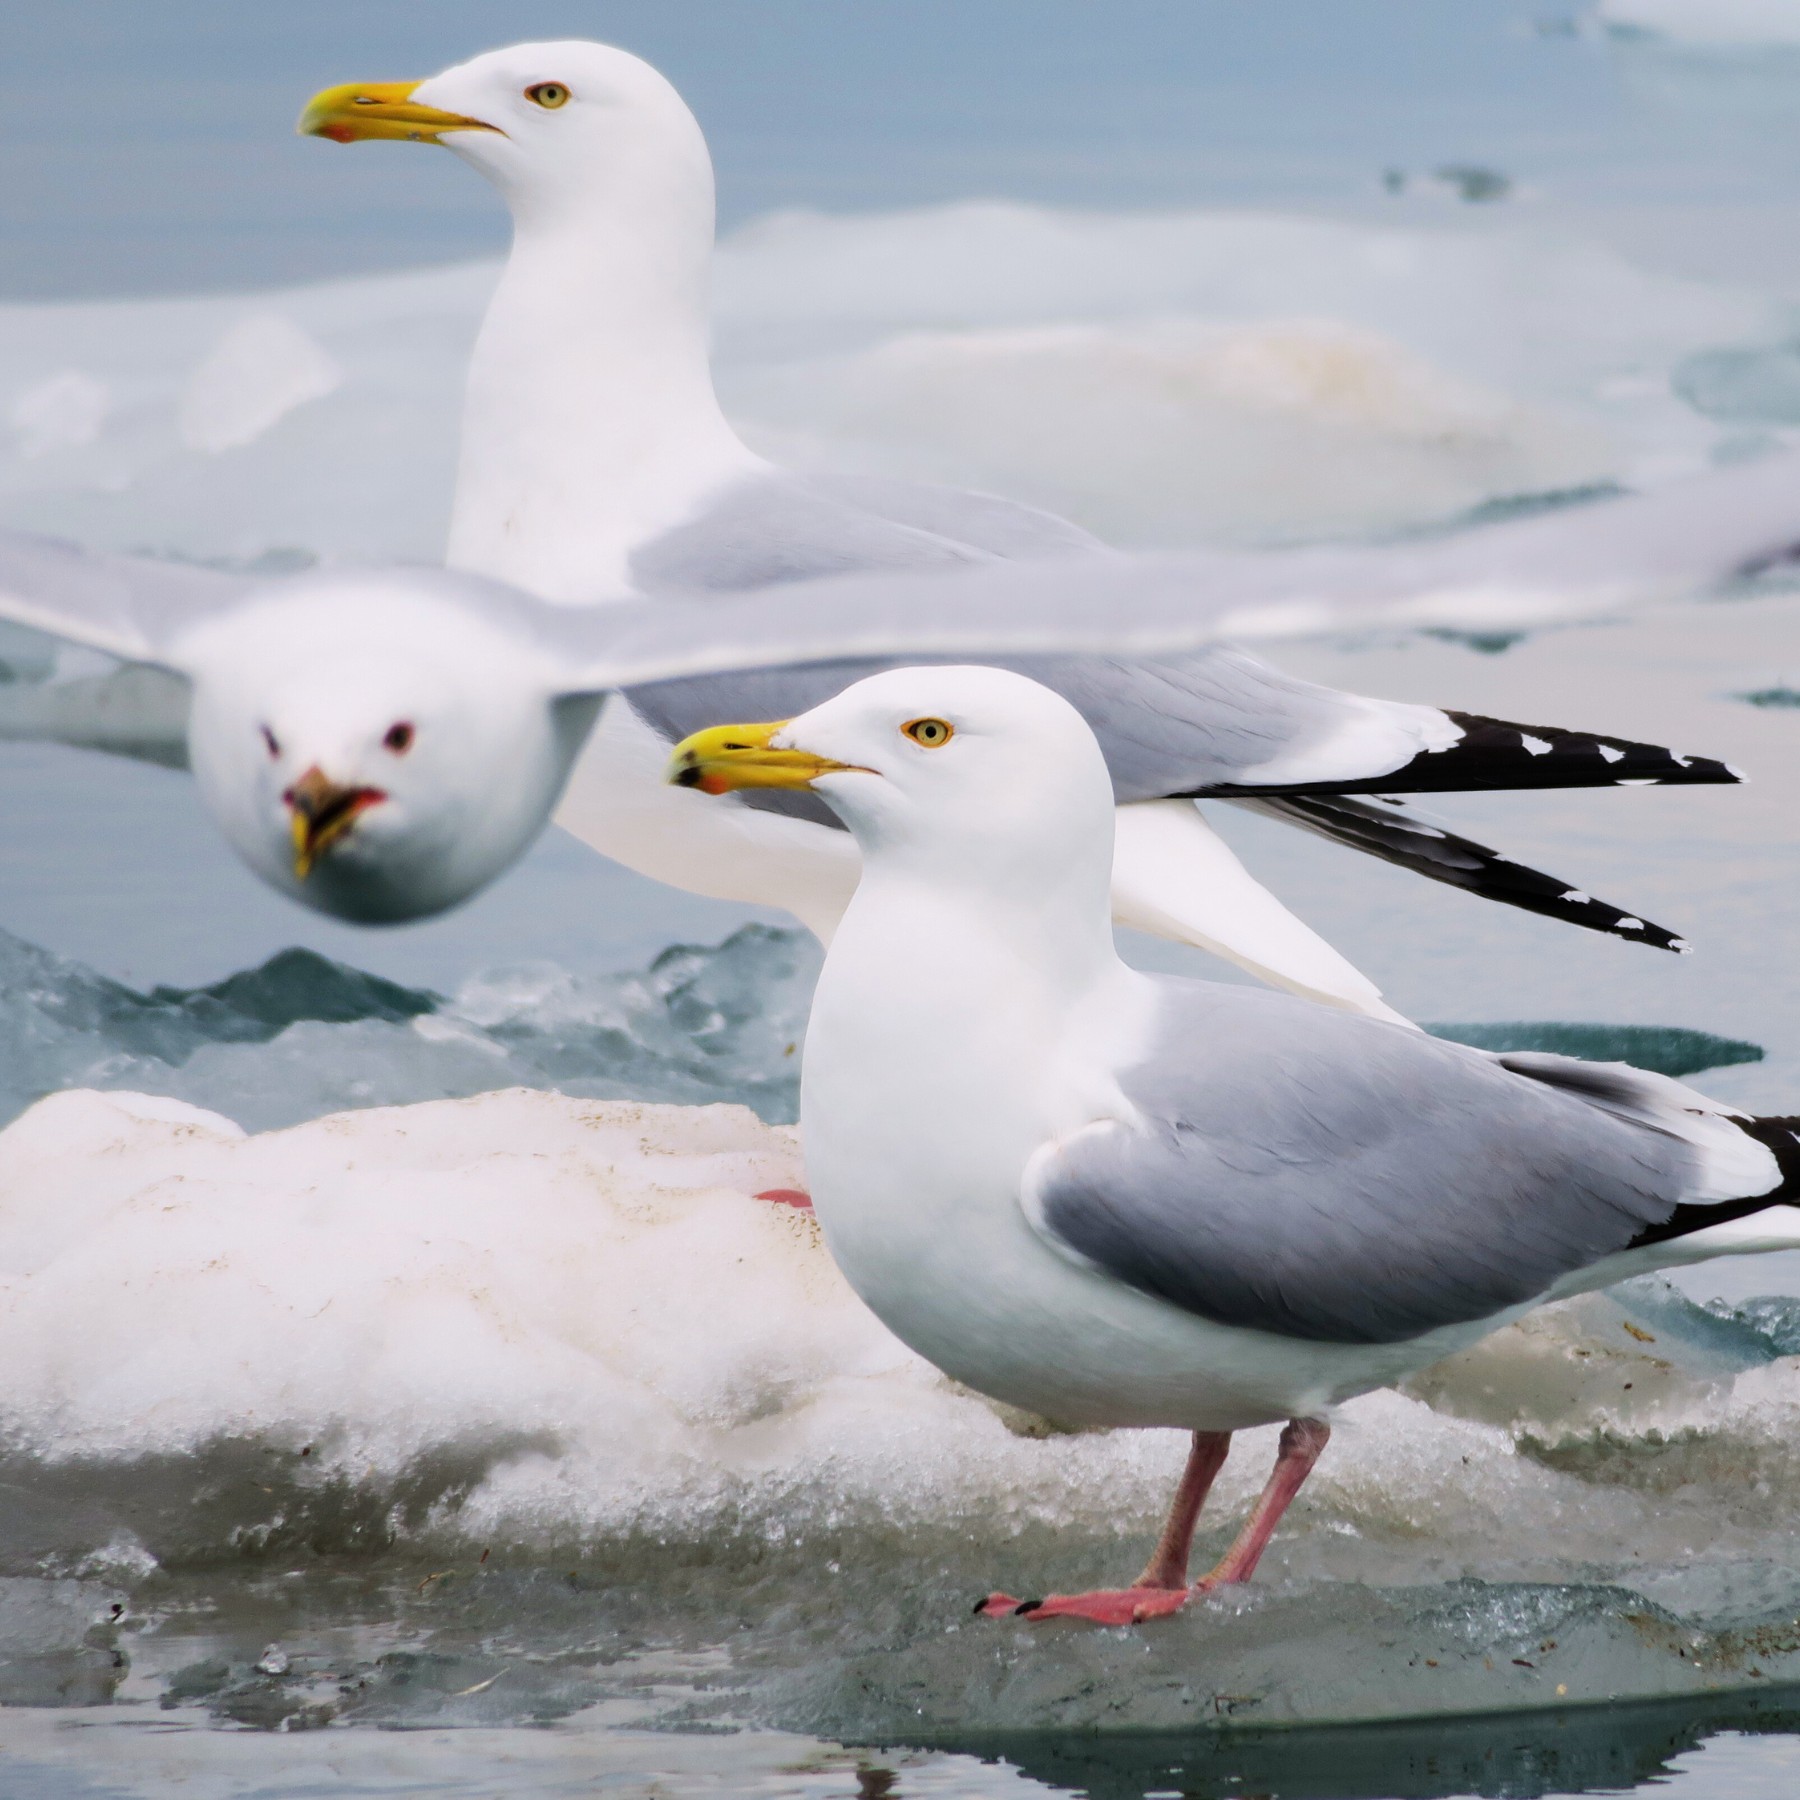 Three seagulls standing and hovering over ice.